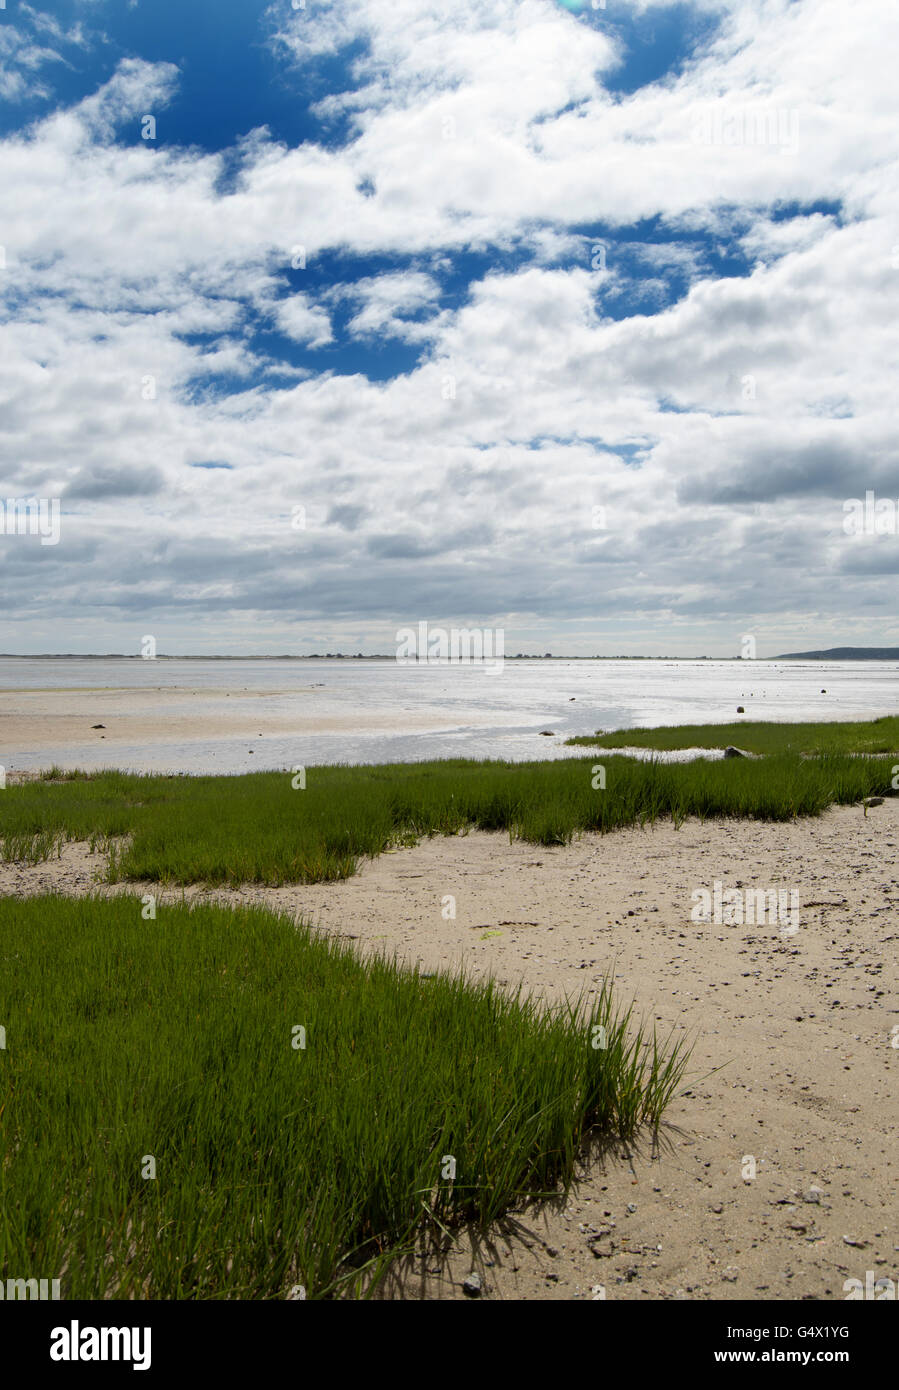 Plymouth, Massachusetts beach with wild grass and clouds Stock Photo